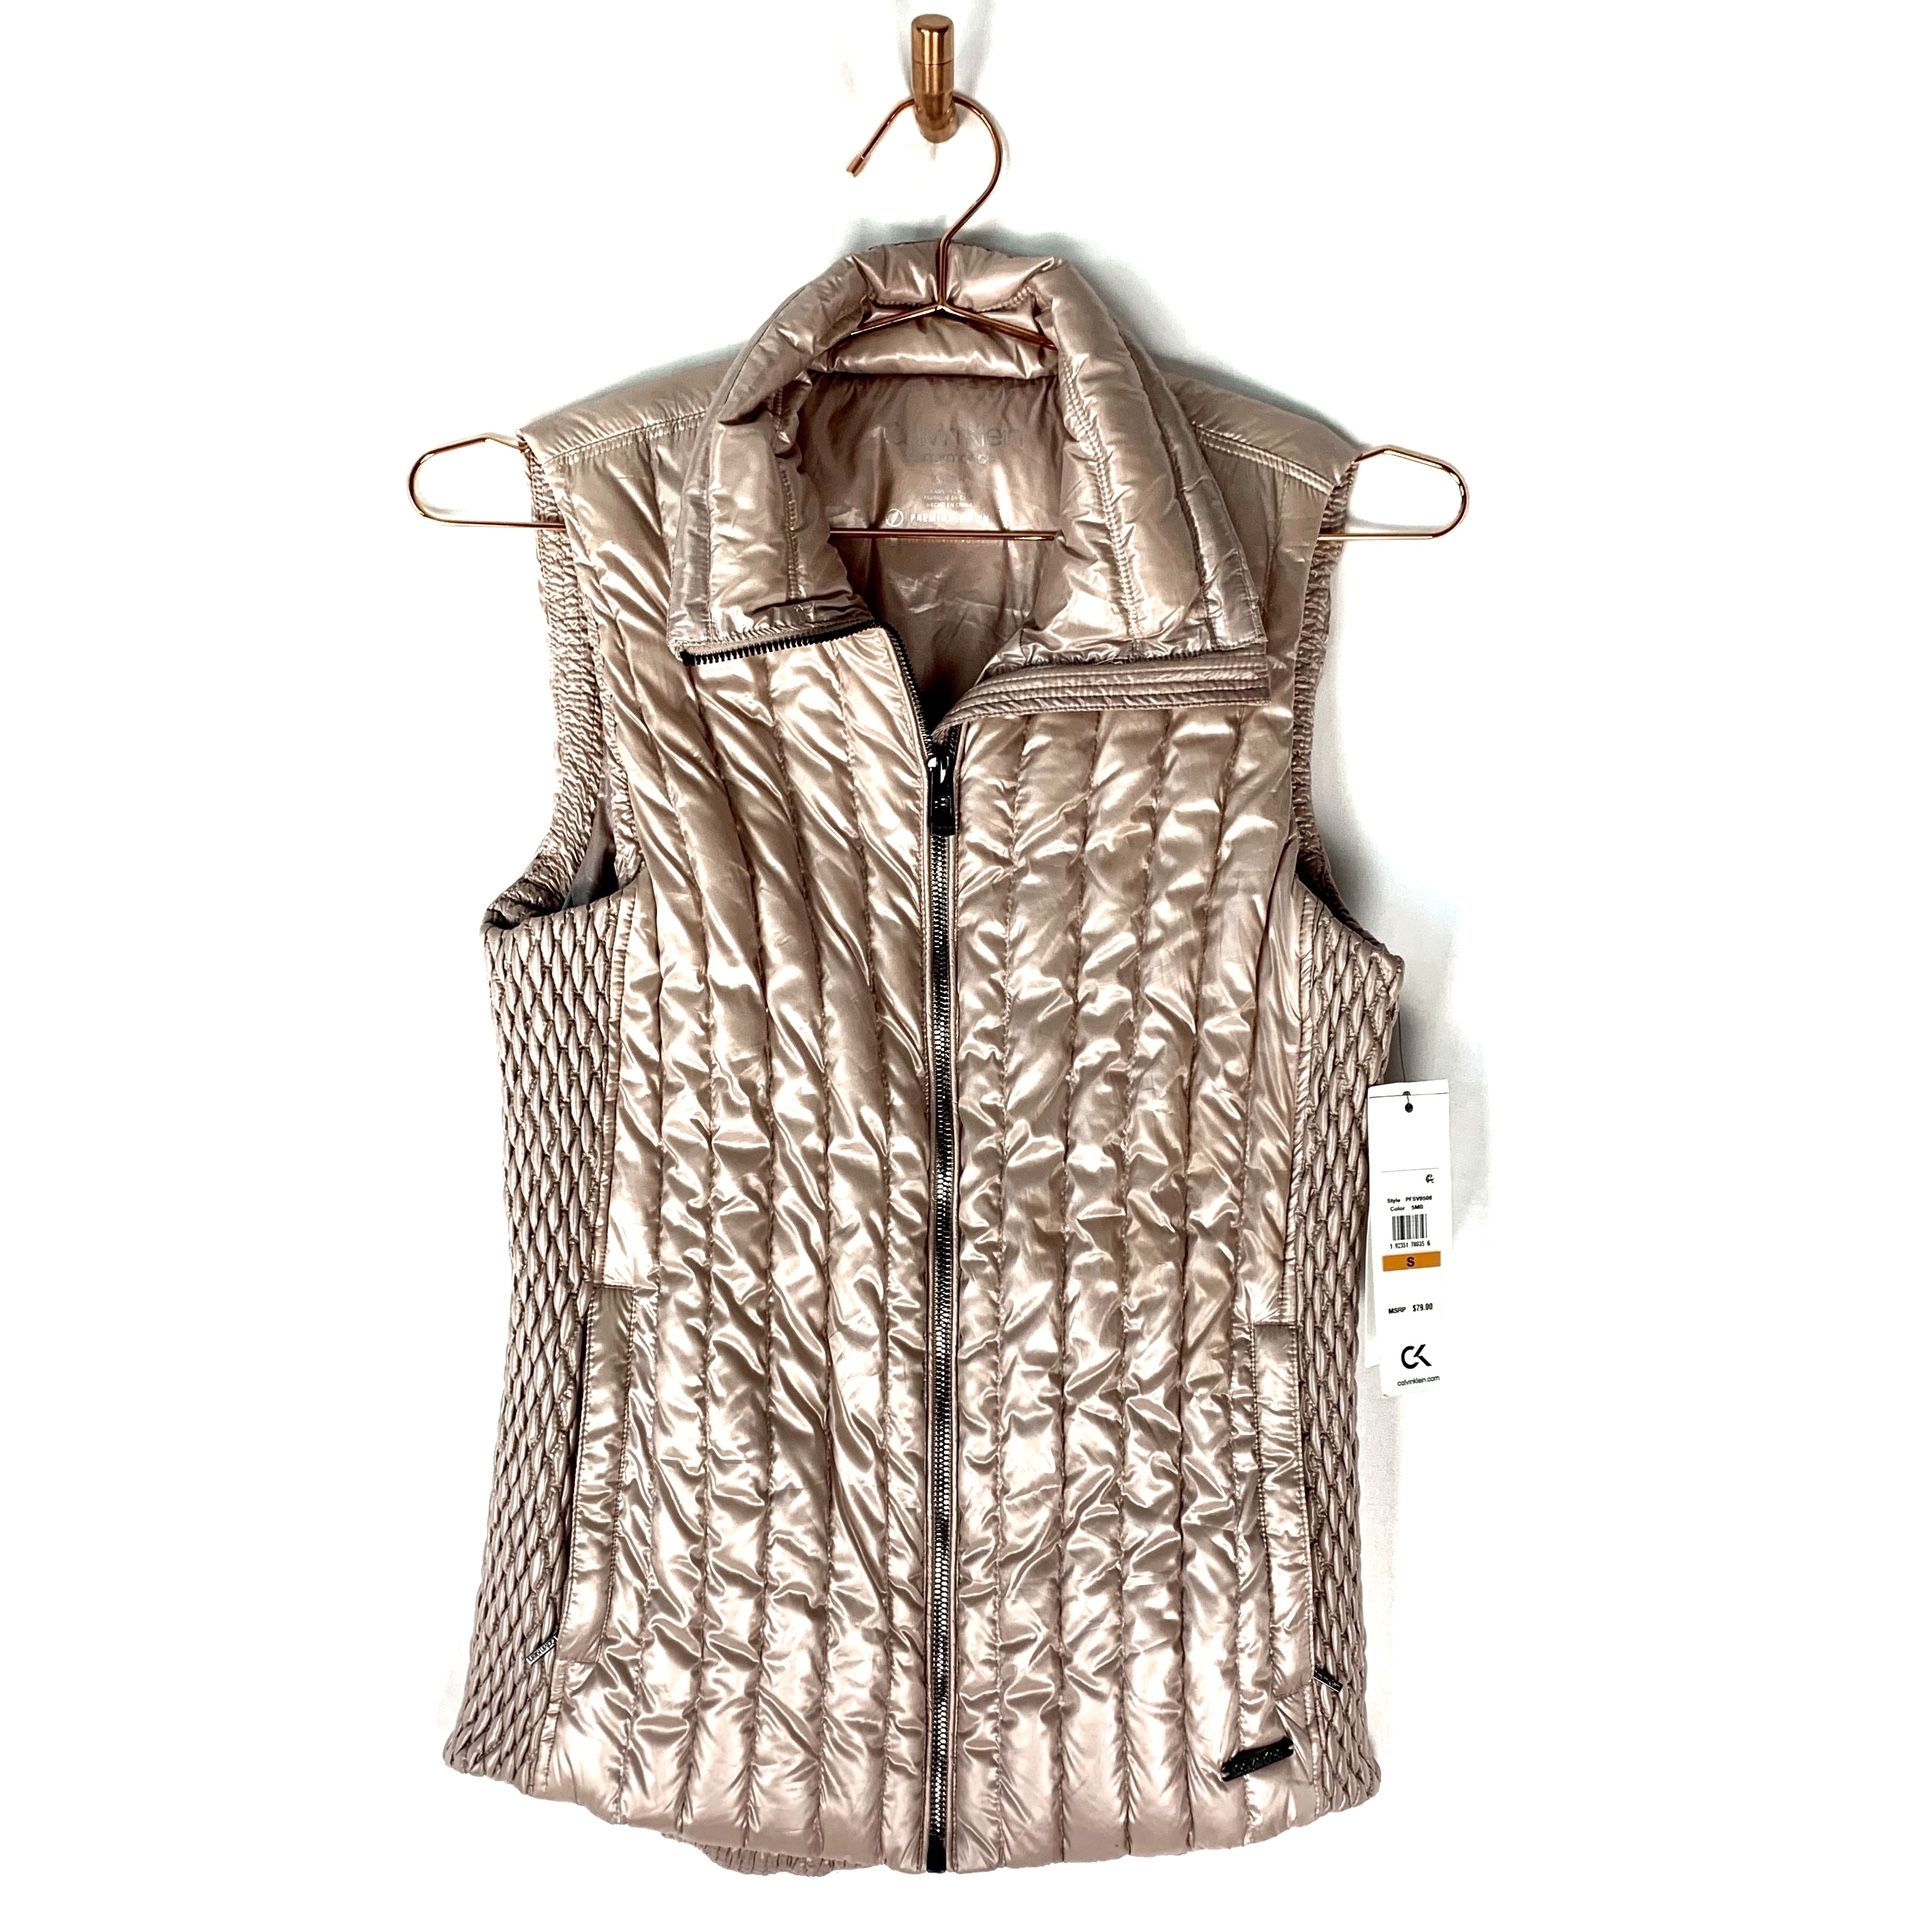 RARE Calvin Klein Performance 2-Pocket Full-Zip Sleeveless Down Puffer Vest in Rose Gold with Gunmetal Zippers & Logo Hardware, NWT, Size Small